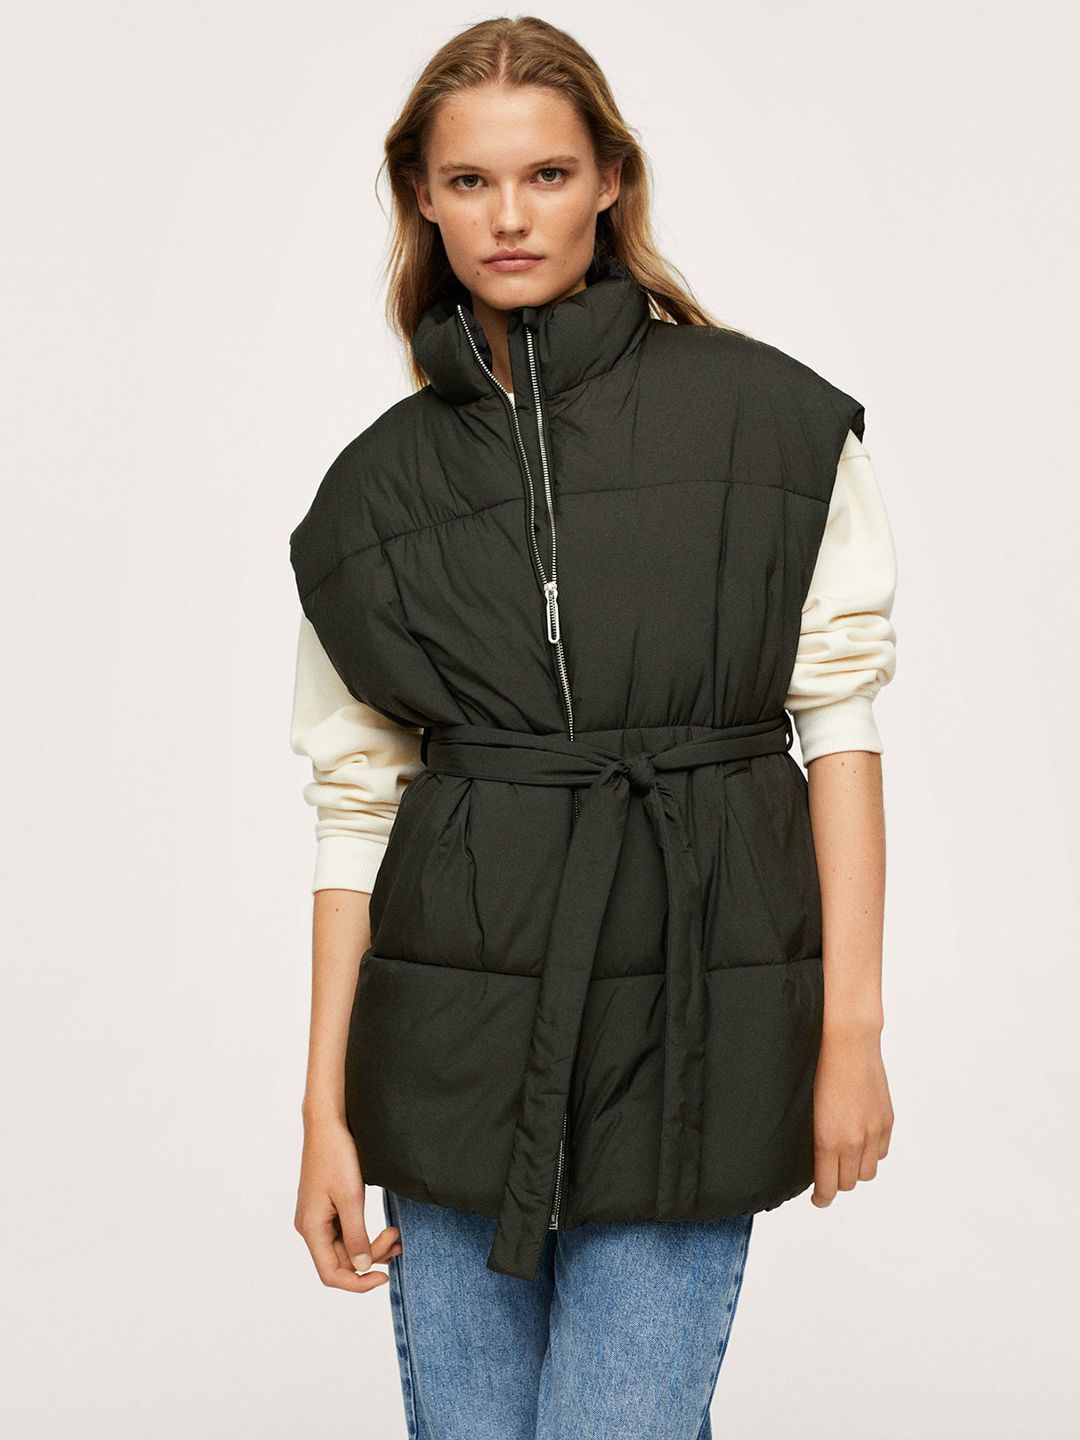 MANGO Women Black Solid Padded Jacket with Belt Price in India